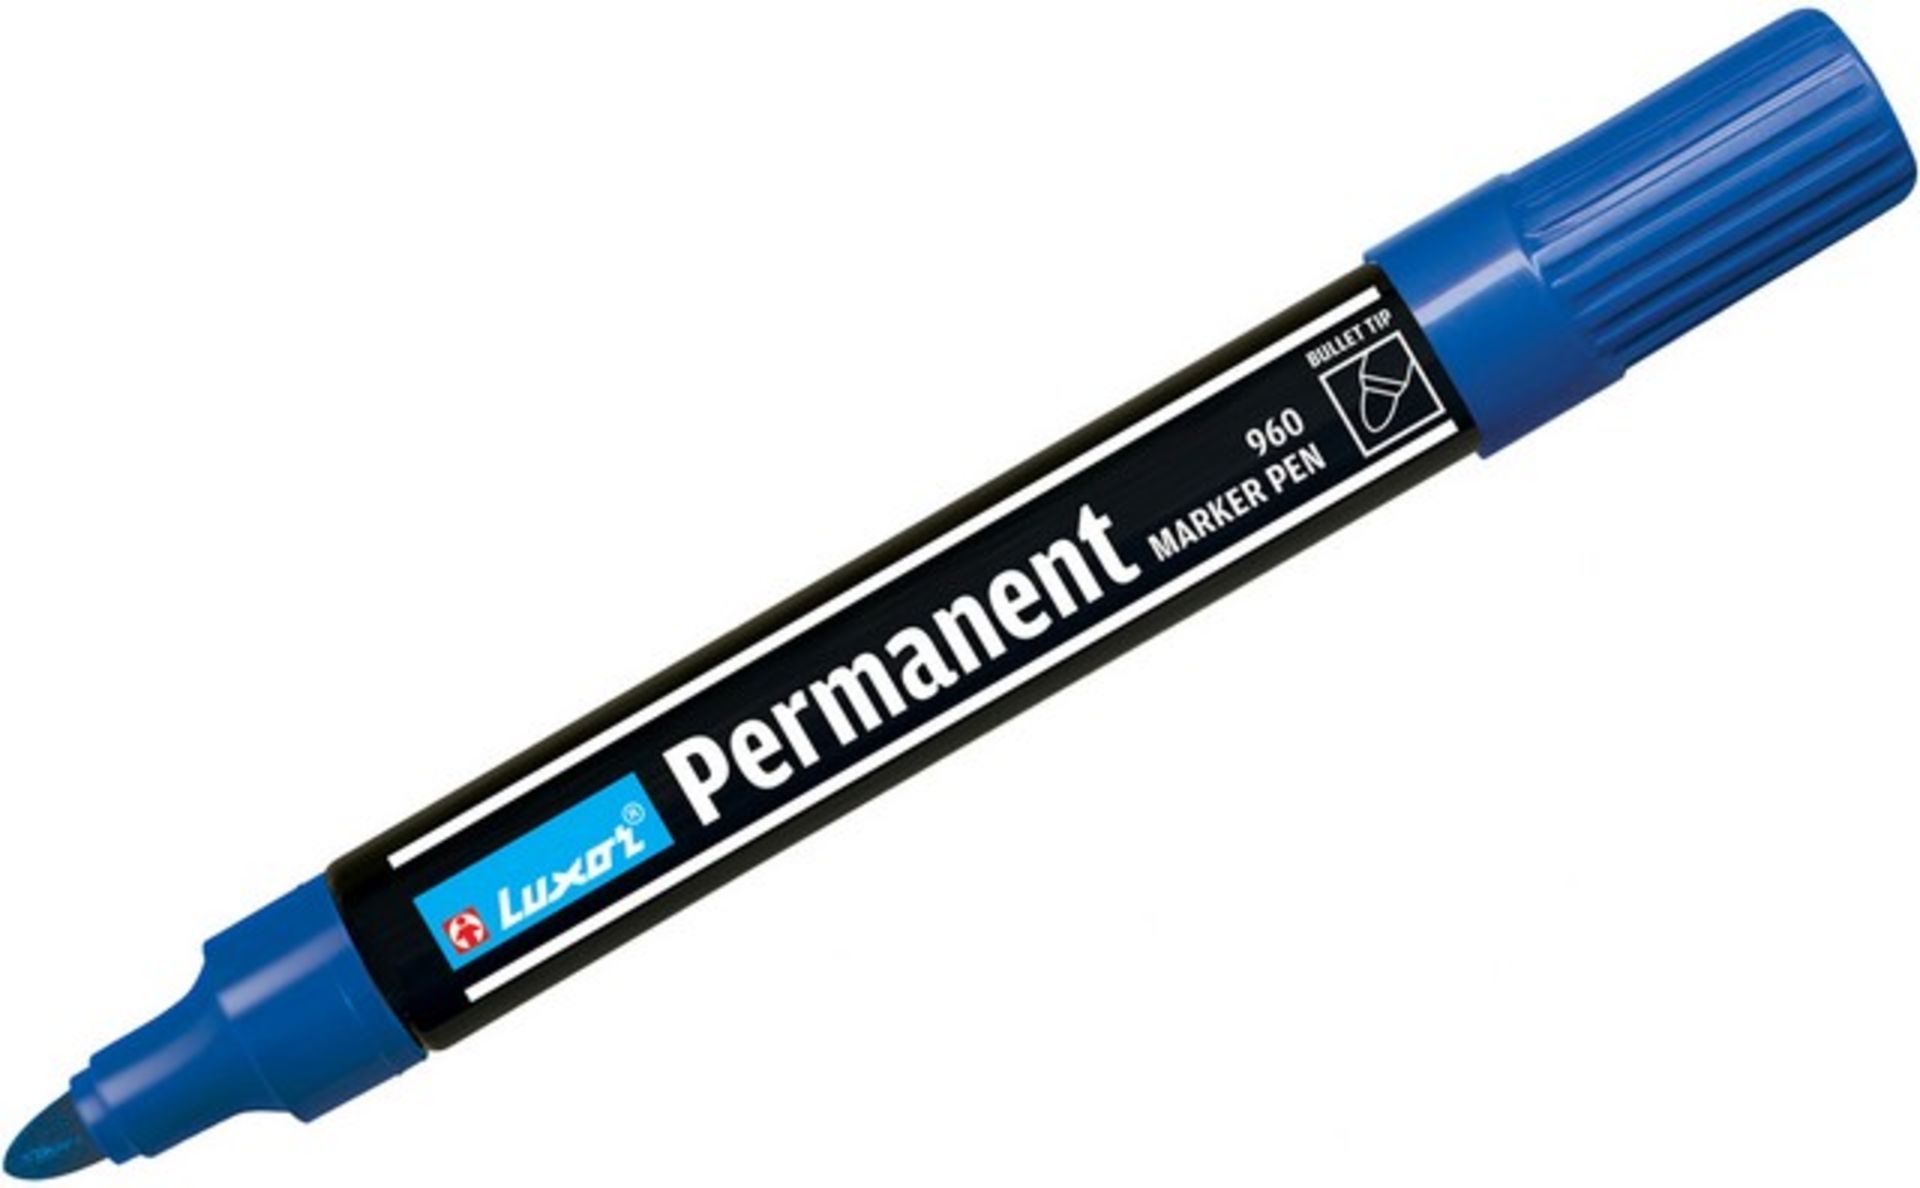 V Brand New 12 Pack Luxor Permanent Marker Pens Blue (Image is different colour) OSP £12.09 (